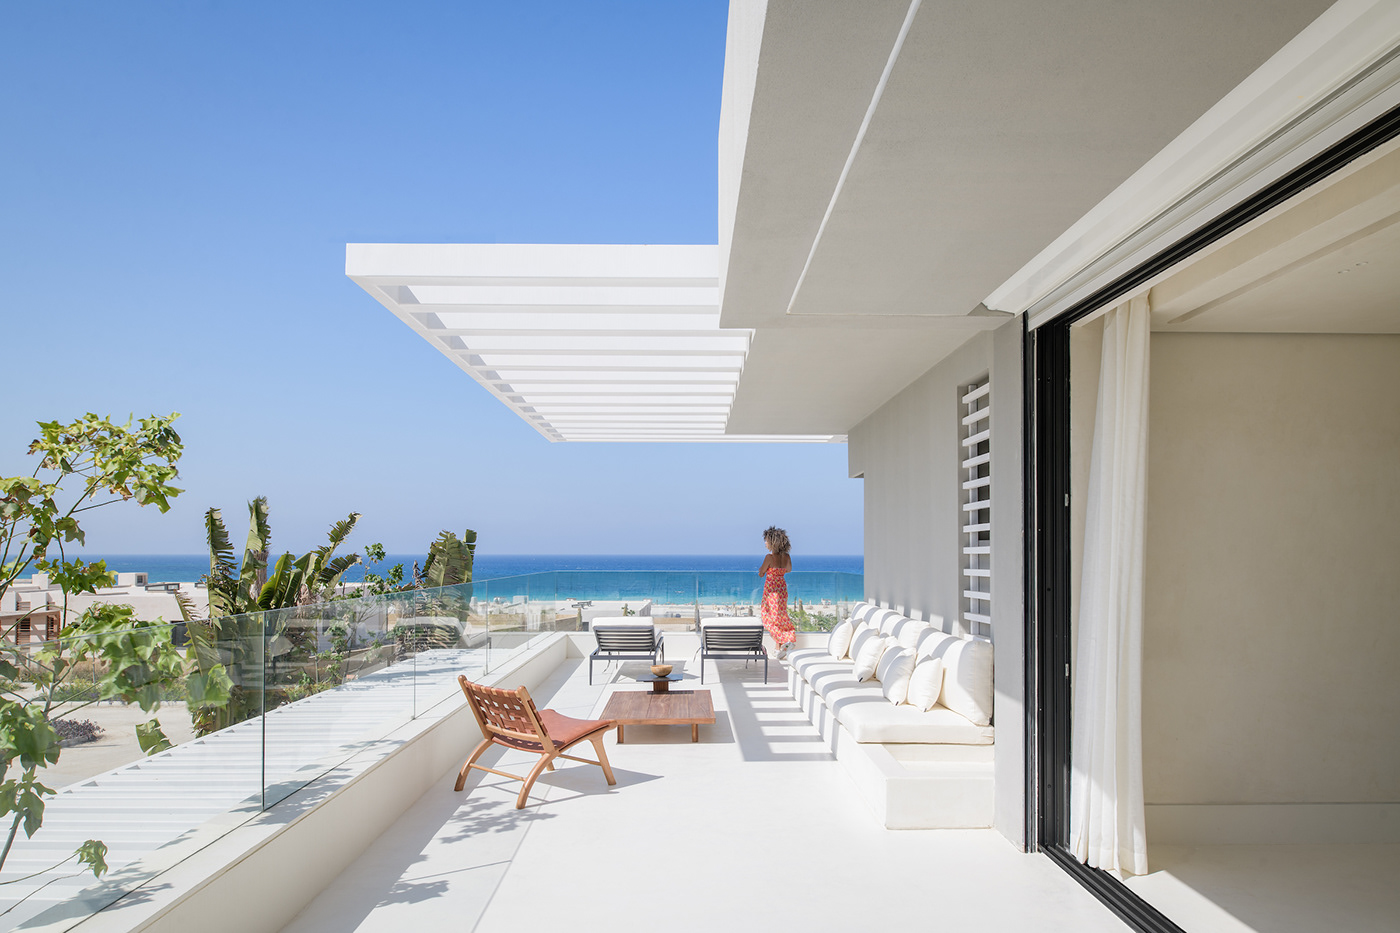 architecture design Photography  summer beach house residential